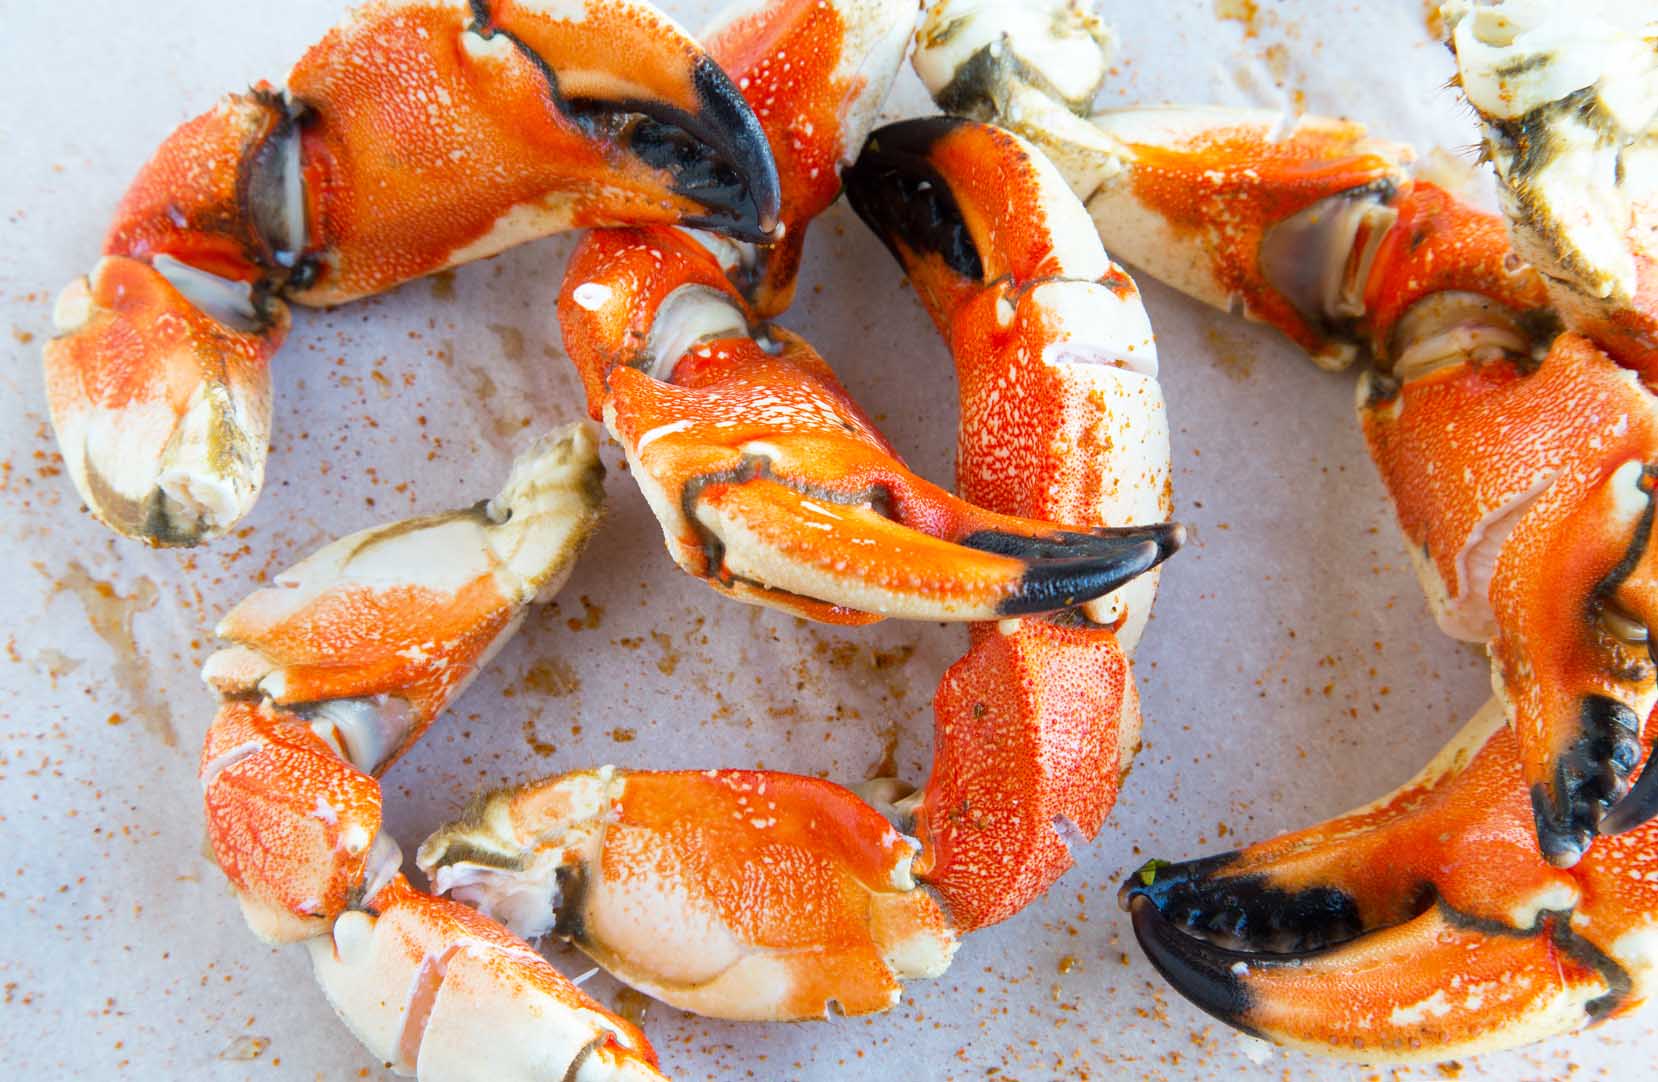 jonah-crab-claws-because-seafood-makes-you-smile-chef-dennis